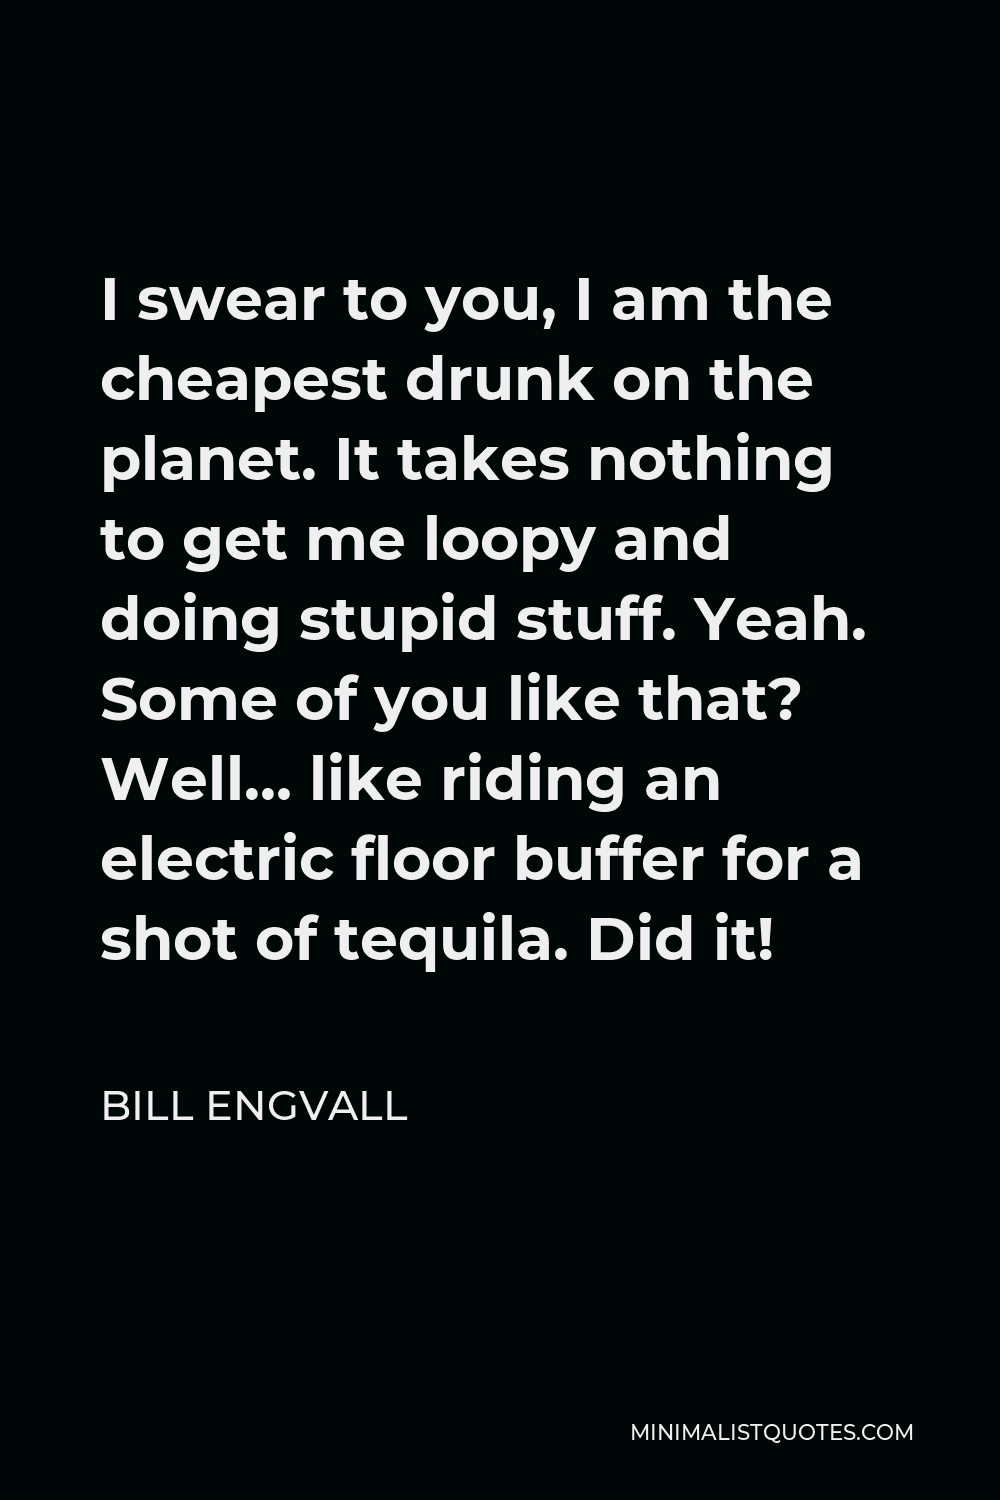 Bill Engvall Quote - I swear to you, I am the cheapest drunk on the planet. It takes nothing to get me loopy and doing stupid stuff. Yeah. Some of you like that? Well… like riding an electric floor buffer for a shot of tequila. Did it!